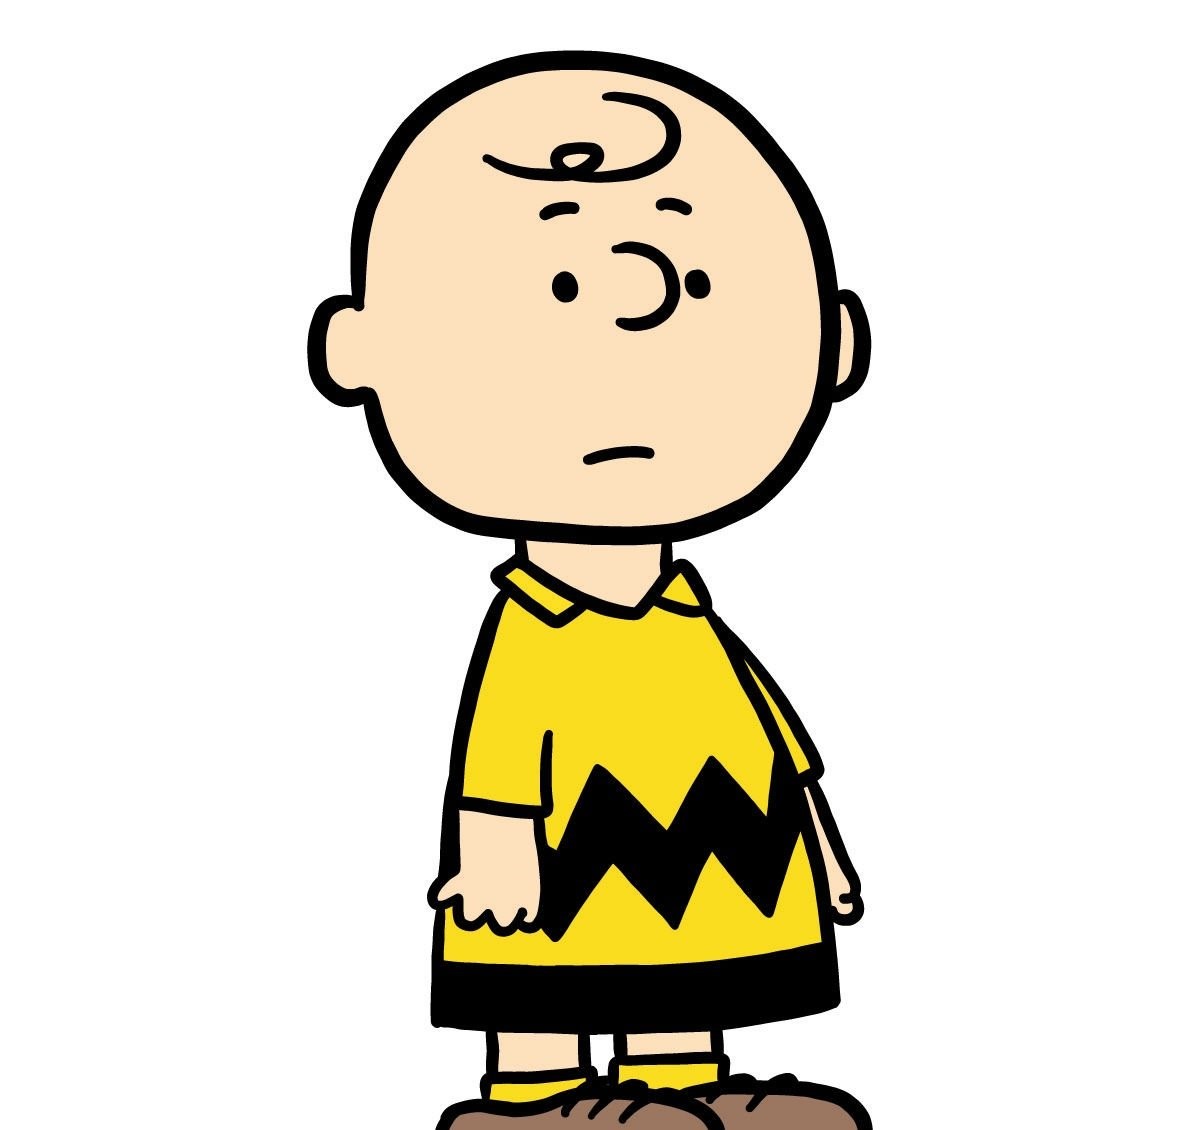 25-facts-about-charlie-brown-peanuts